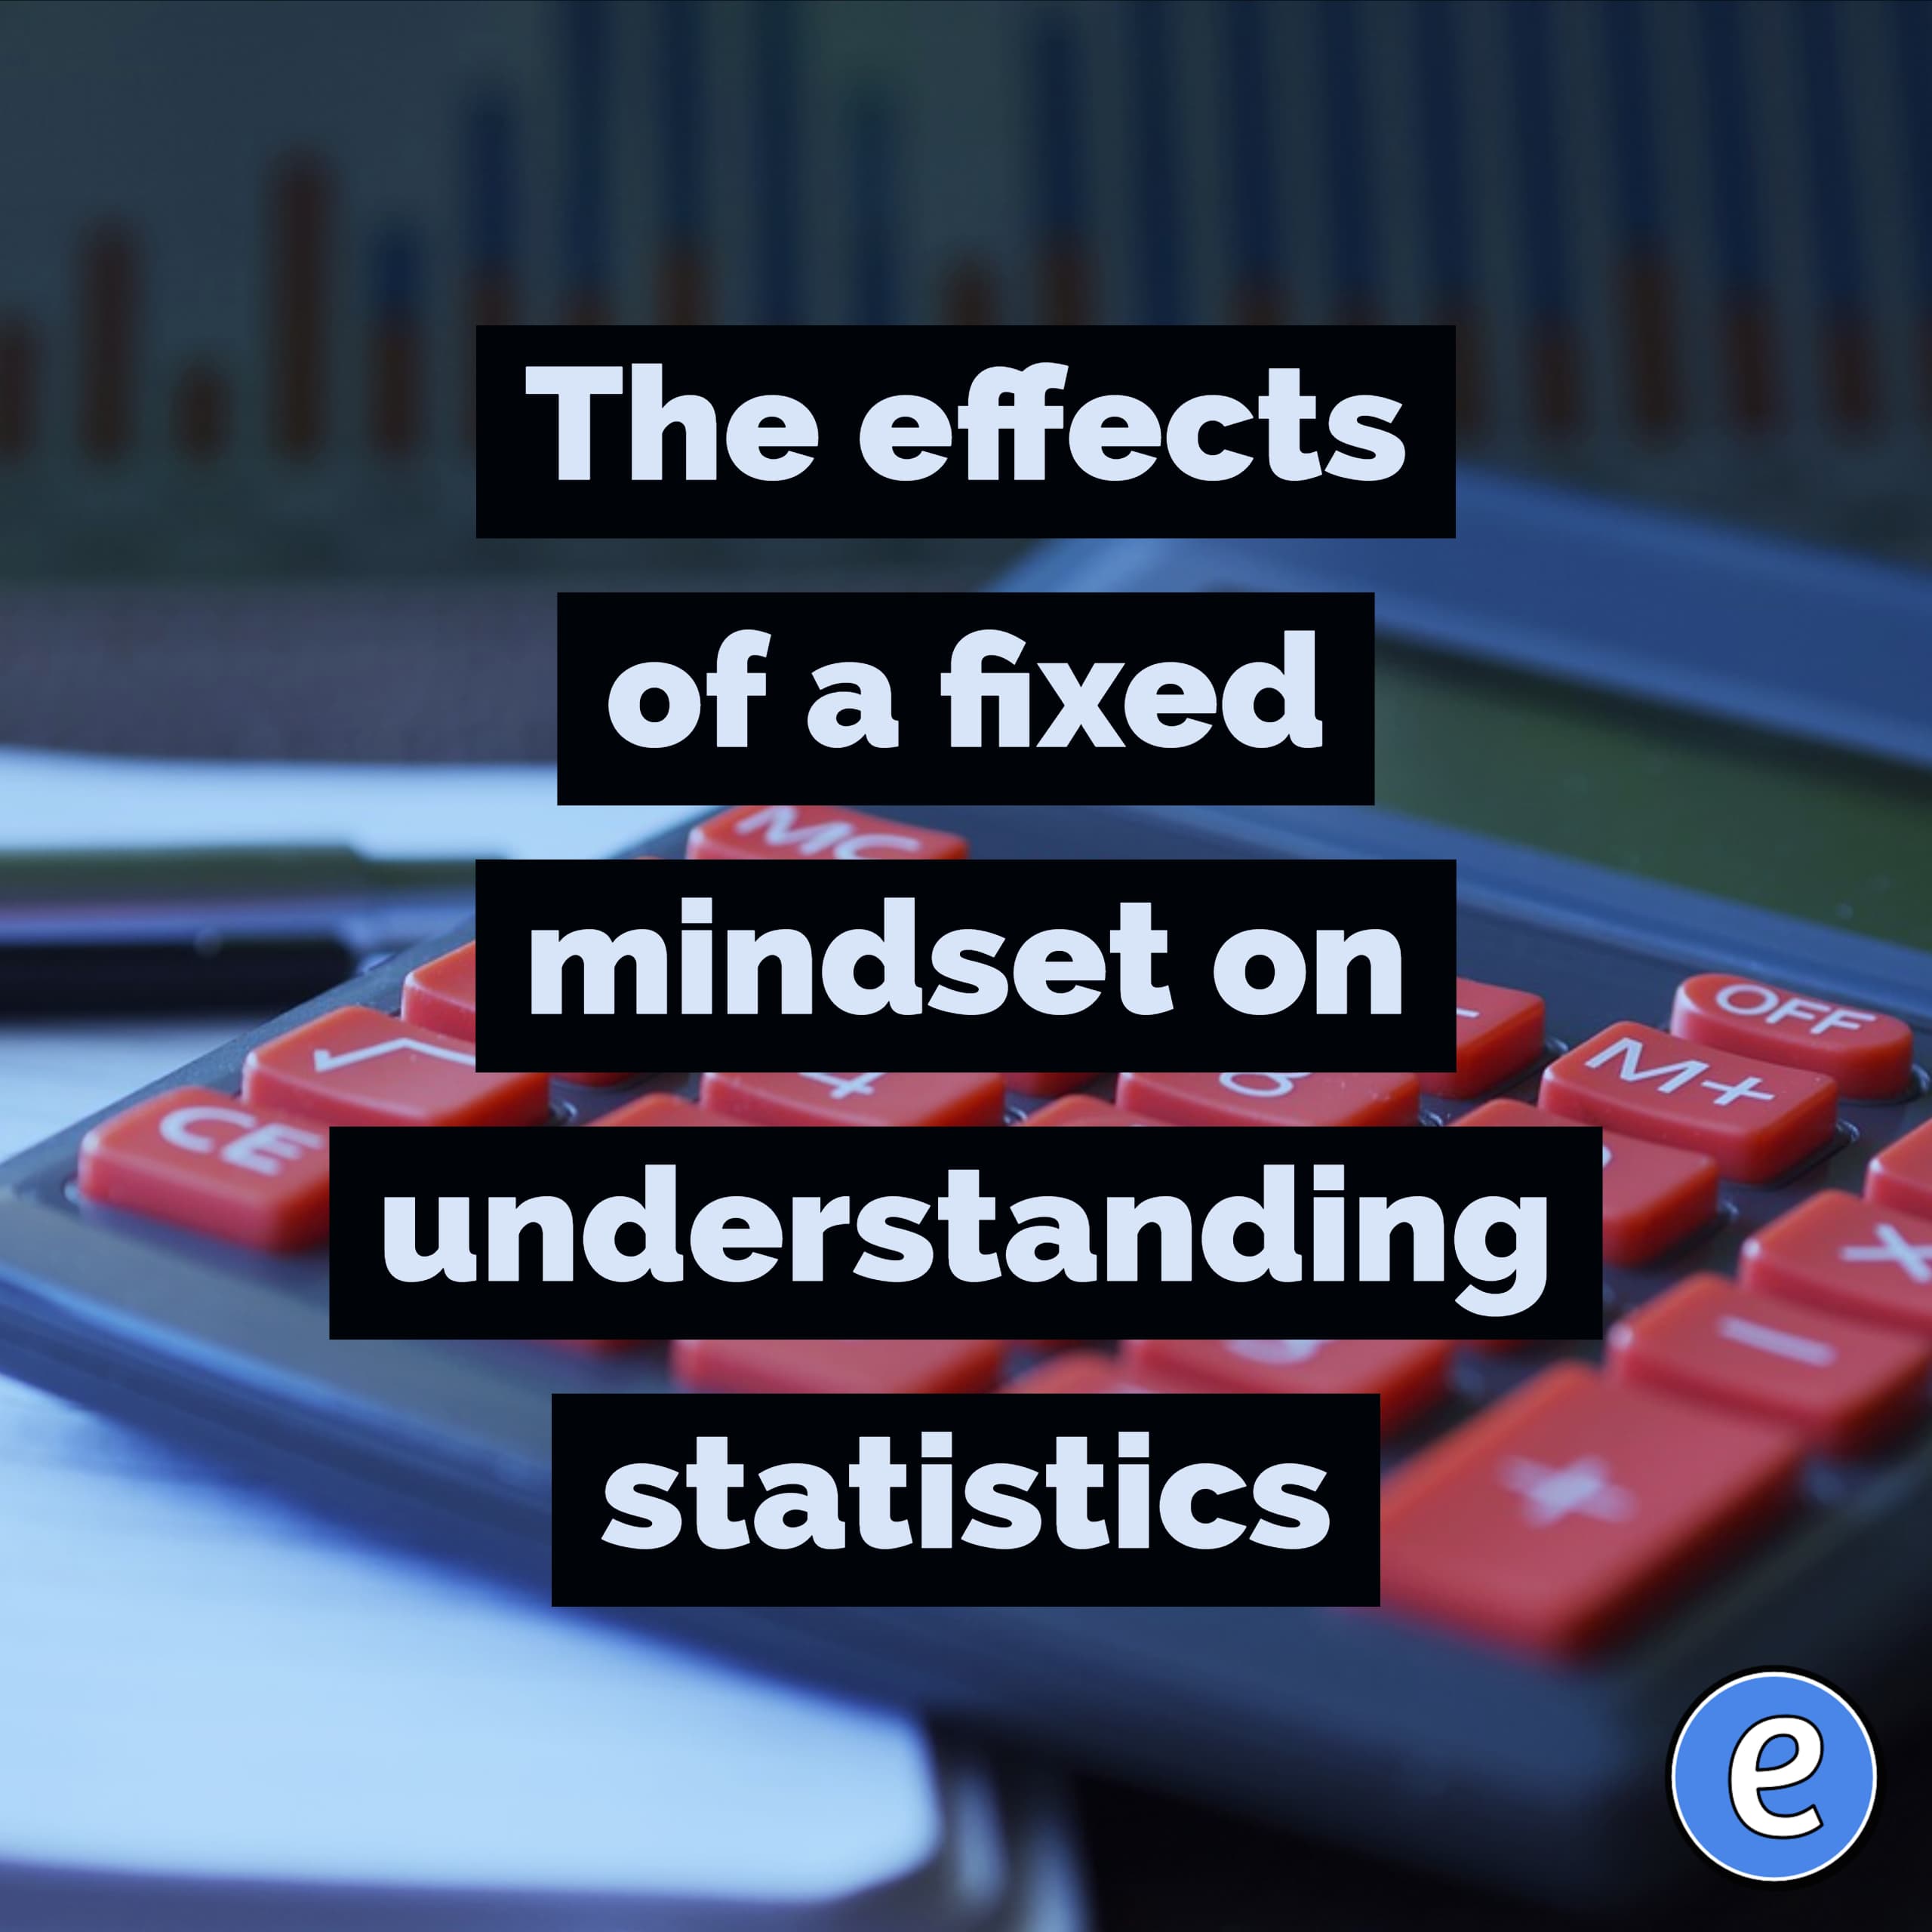 The effects of a fixed mindset on understanding statistics